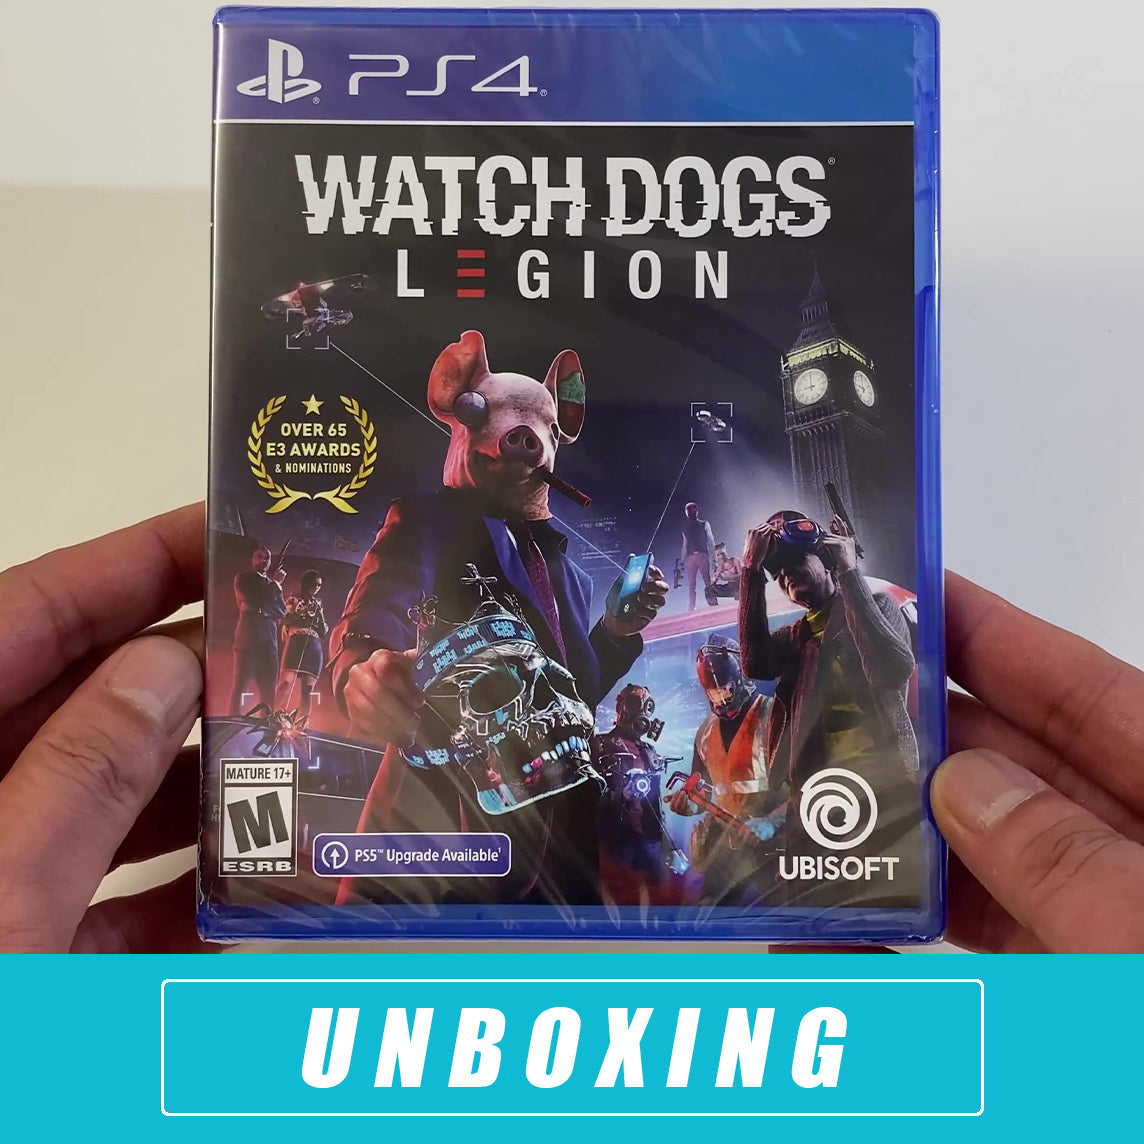 [UNBOXING] Watch Legion (PS4) 4 Dogs J&L Game | - PlayStation